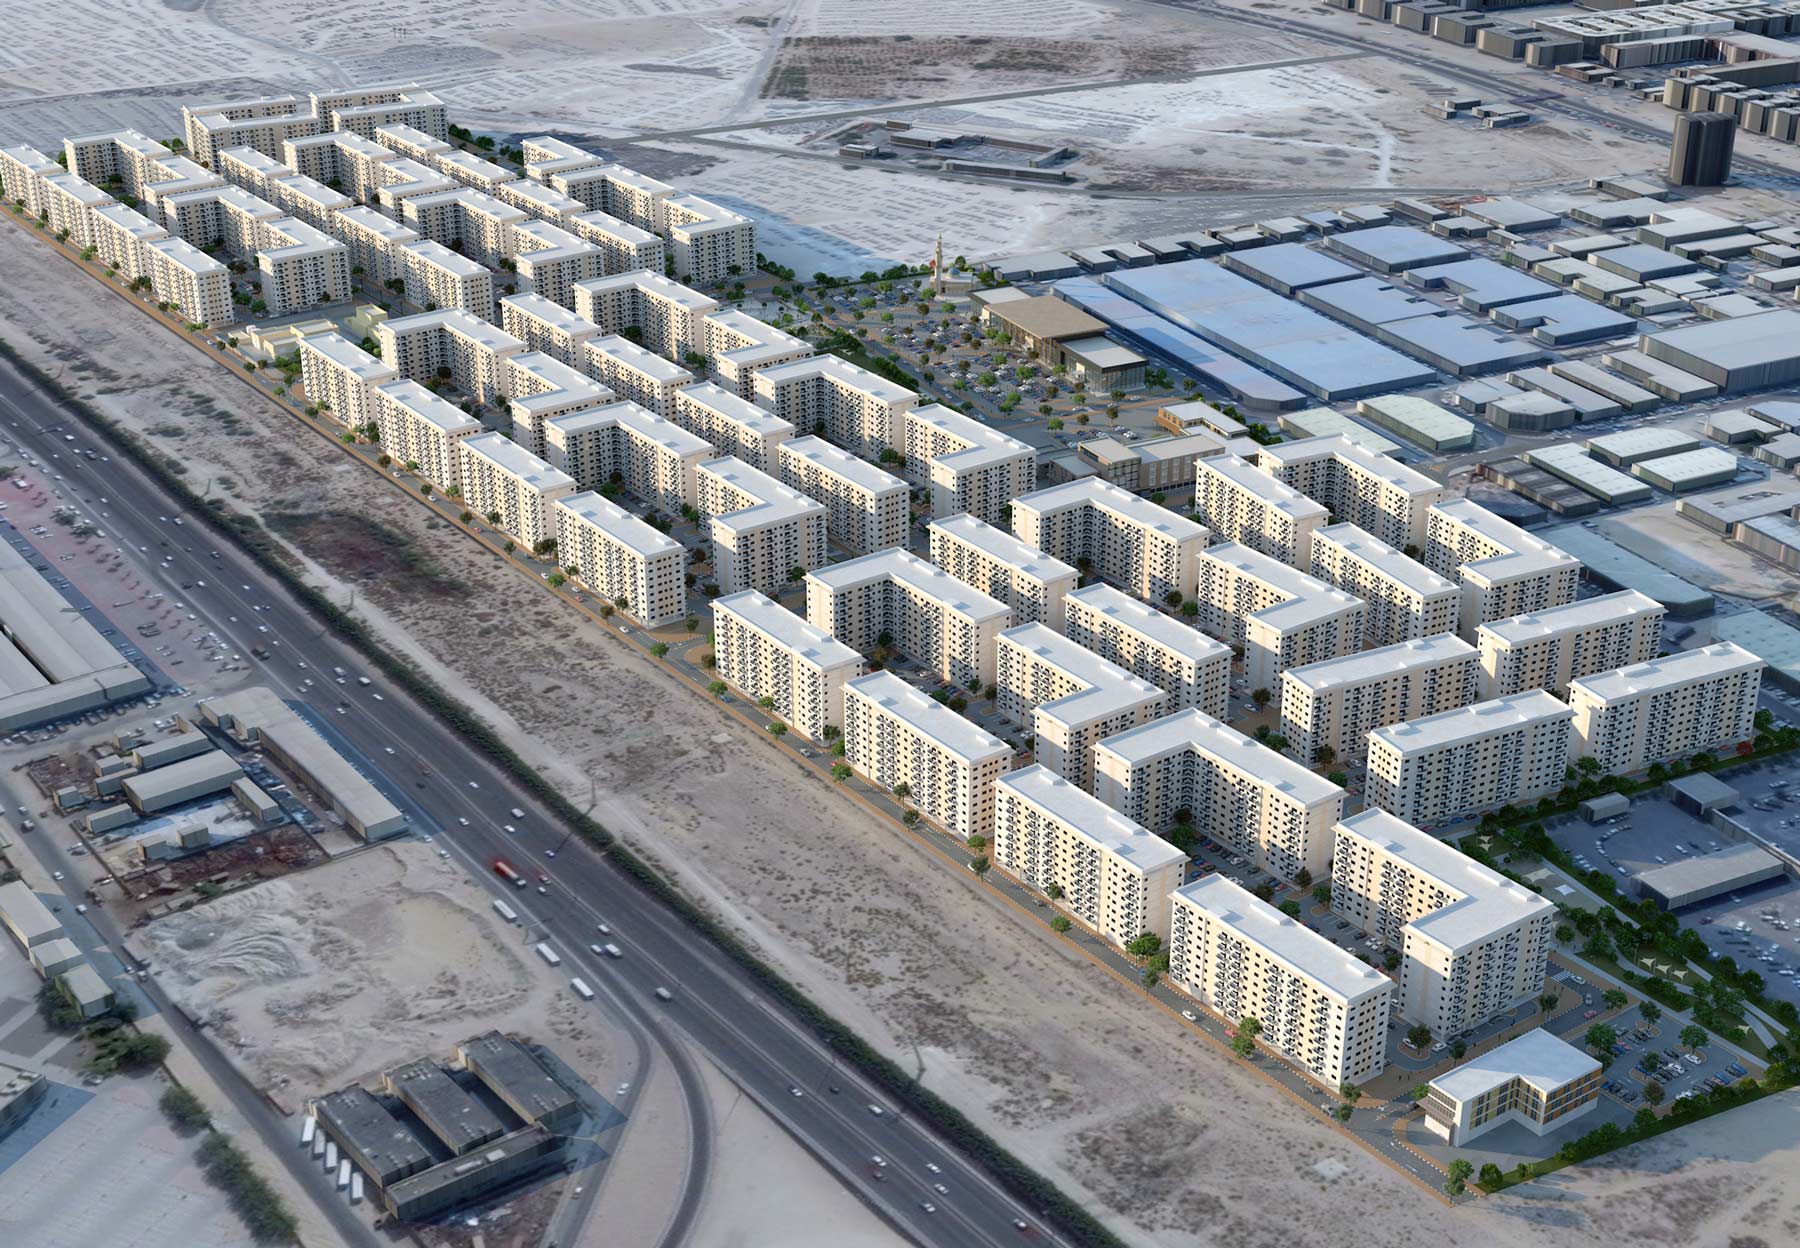 Wasi Properties Launches 6,200 Housing Units at West Village Project in Dubai